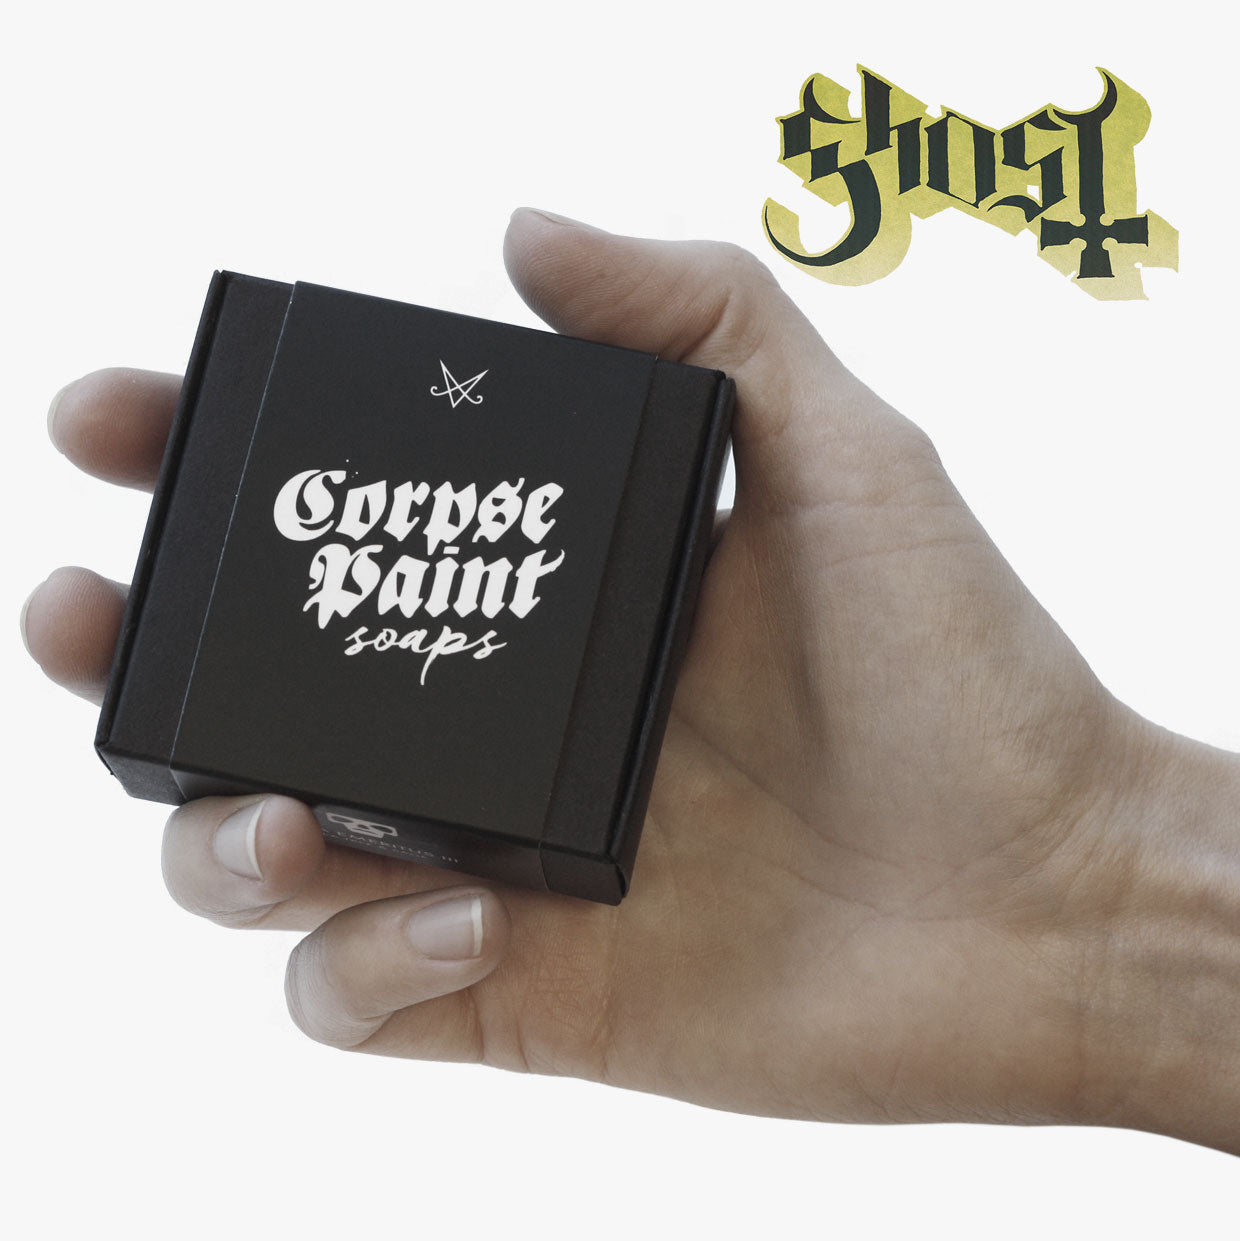 Official Ghost soap in the image of Papa Emeritus Terzo III Soap black box packaging in hand